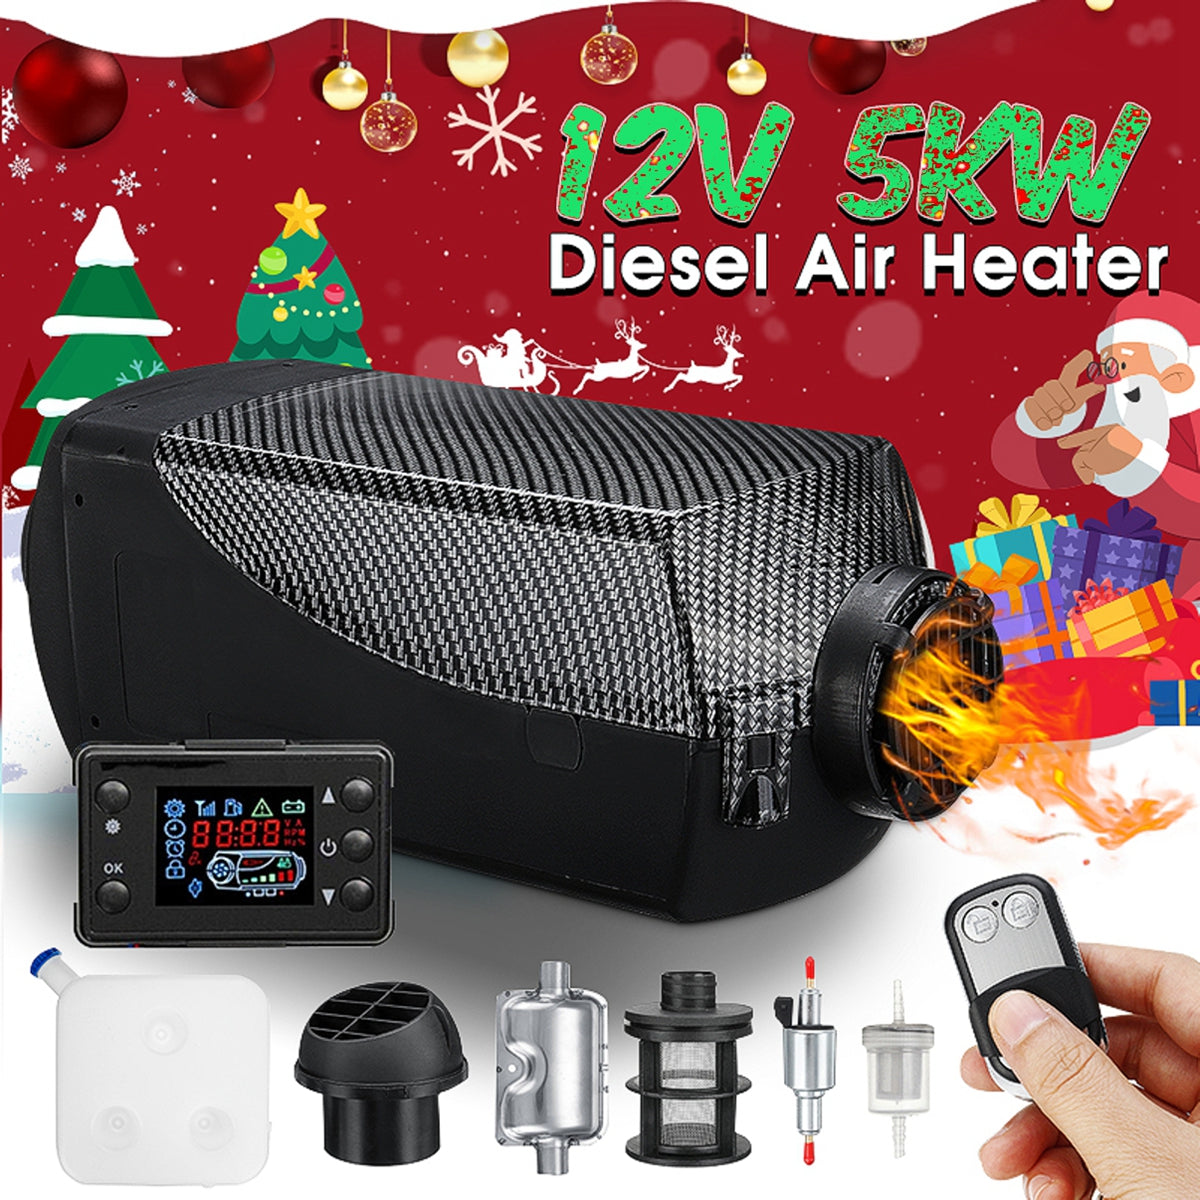 12V 5KW Car Parking Heater Diesel Air Adjustable Hot Remote Control LCD Display For Truck SUV Bus RV Boats - Auto GoShop